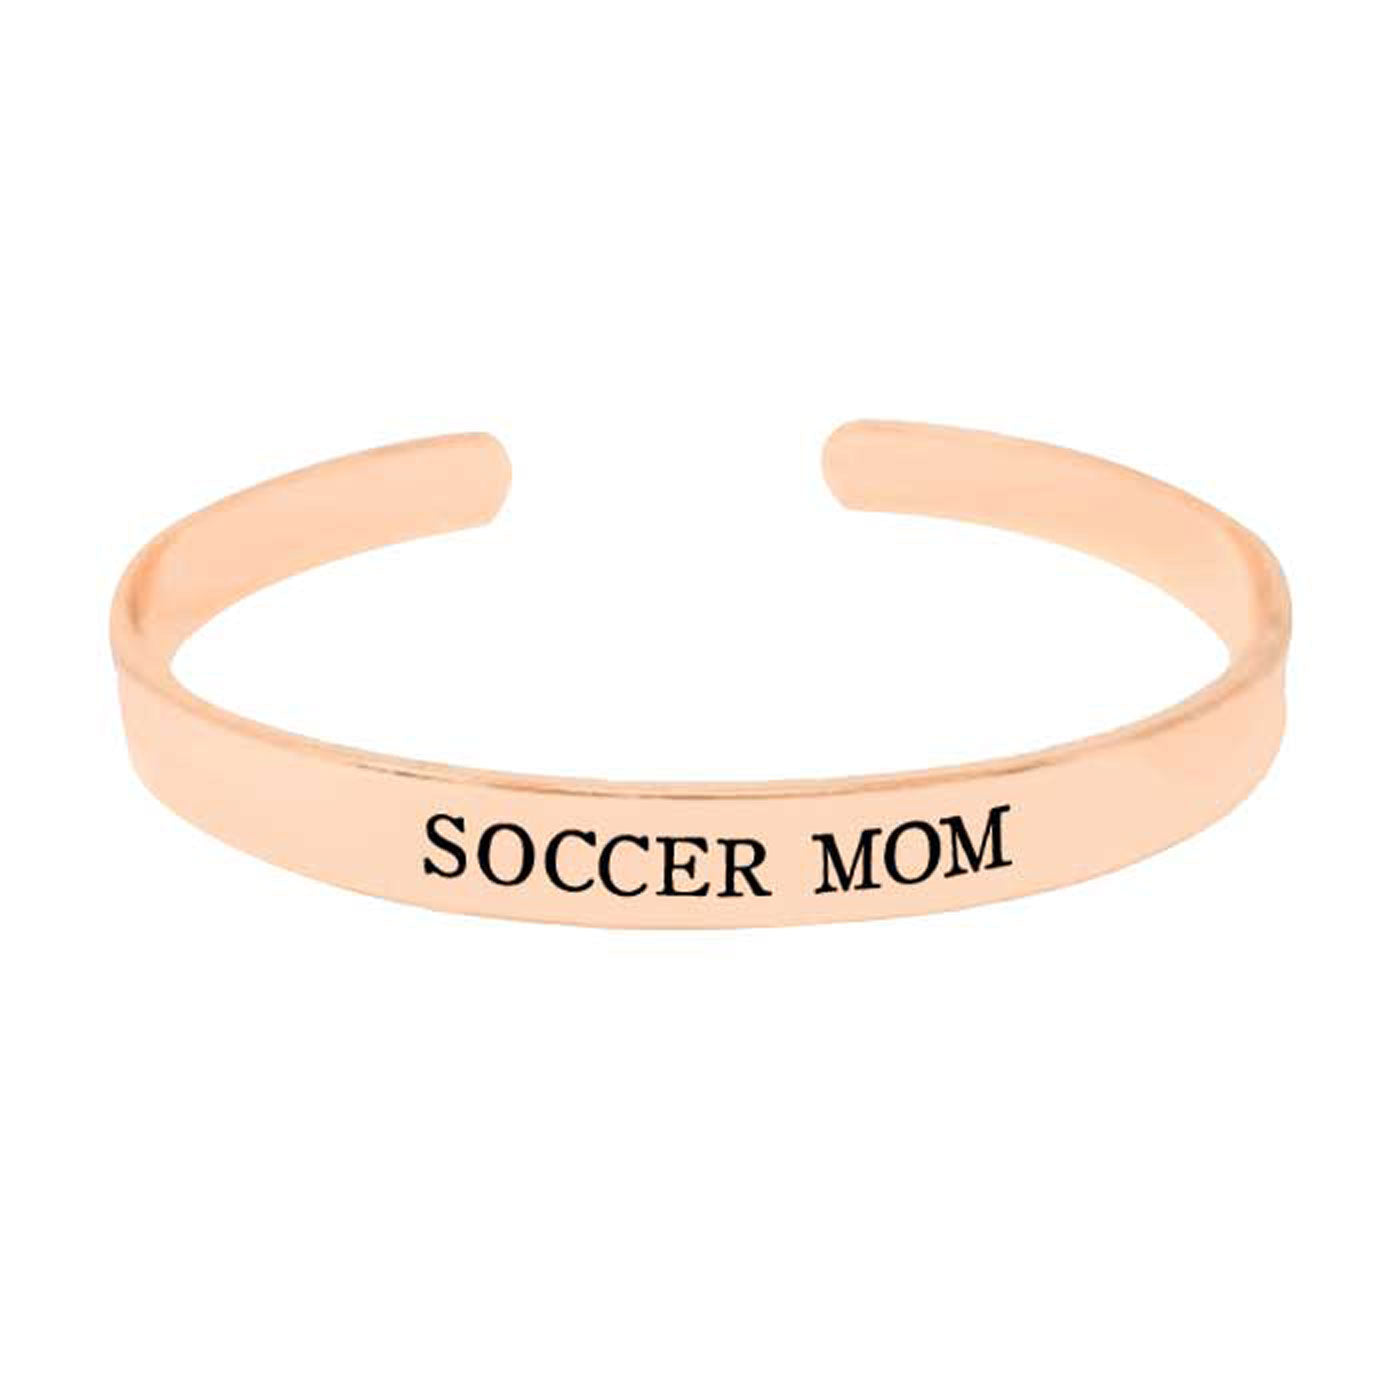 Soccer Mom Gold Dipped Metal Cuff Bracelet, Get ready with these Bracelet, put on a pop of color to complete your ensemble. Perfect for adding just the right amount of shimmer & shine and a touch of class to special events. This Mom bracelet is the ideal Mother's Day present for all the unique ladies in your life, as well as those who have been inspired by sports moms.